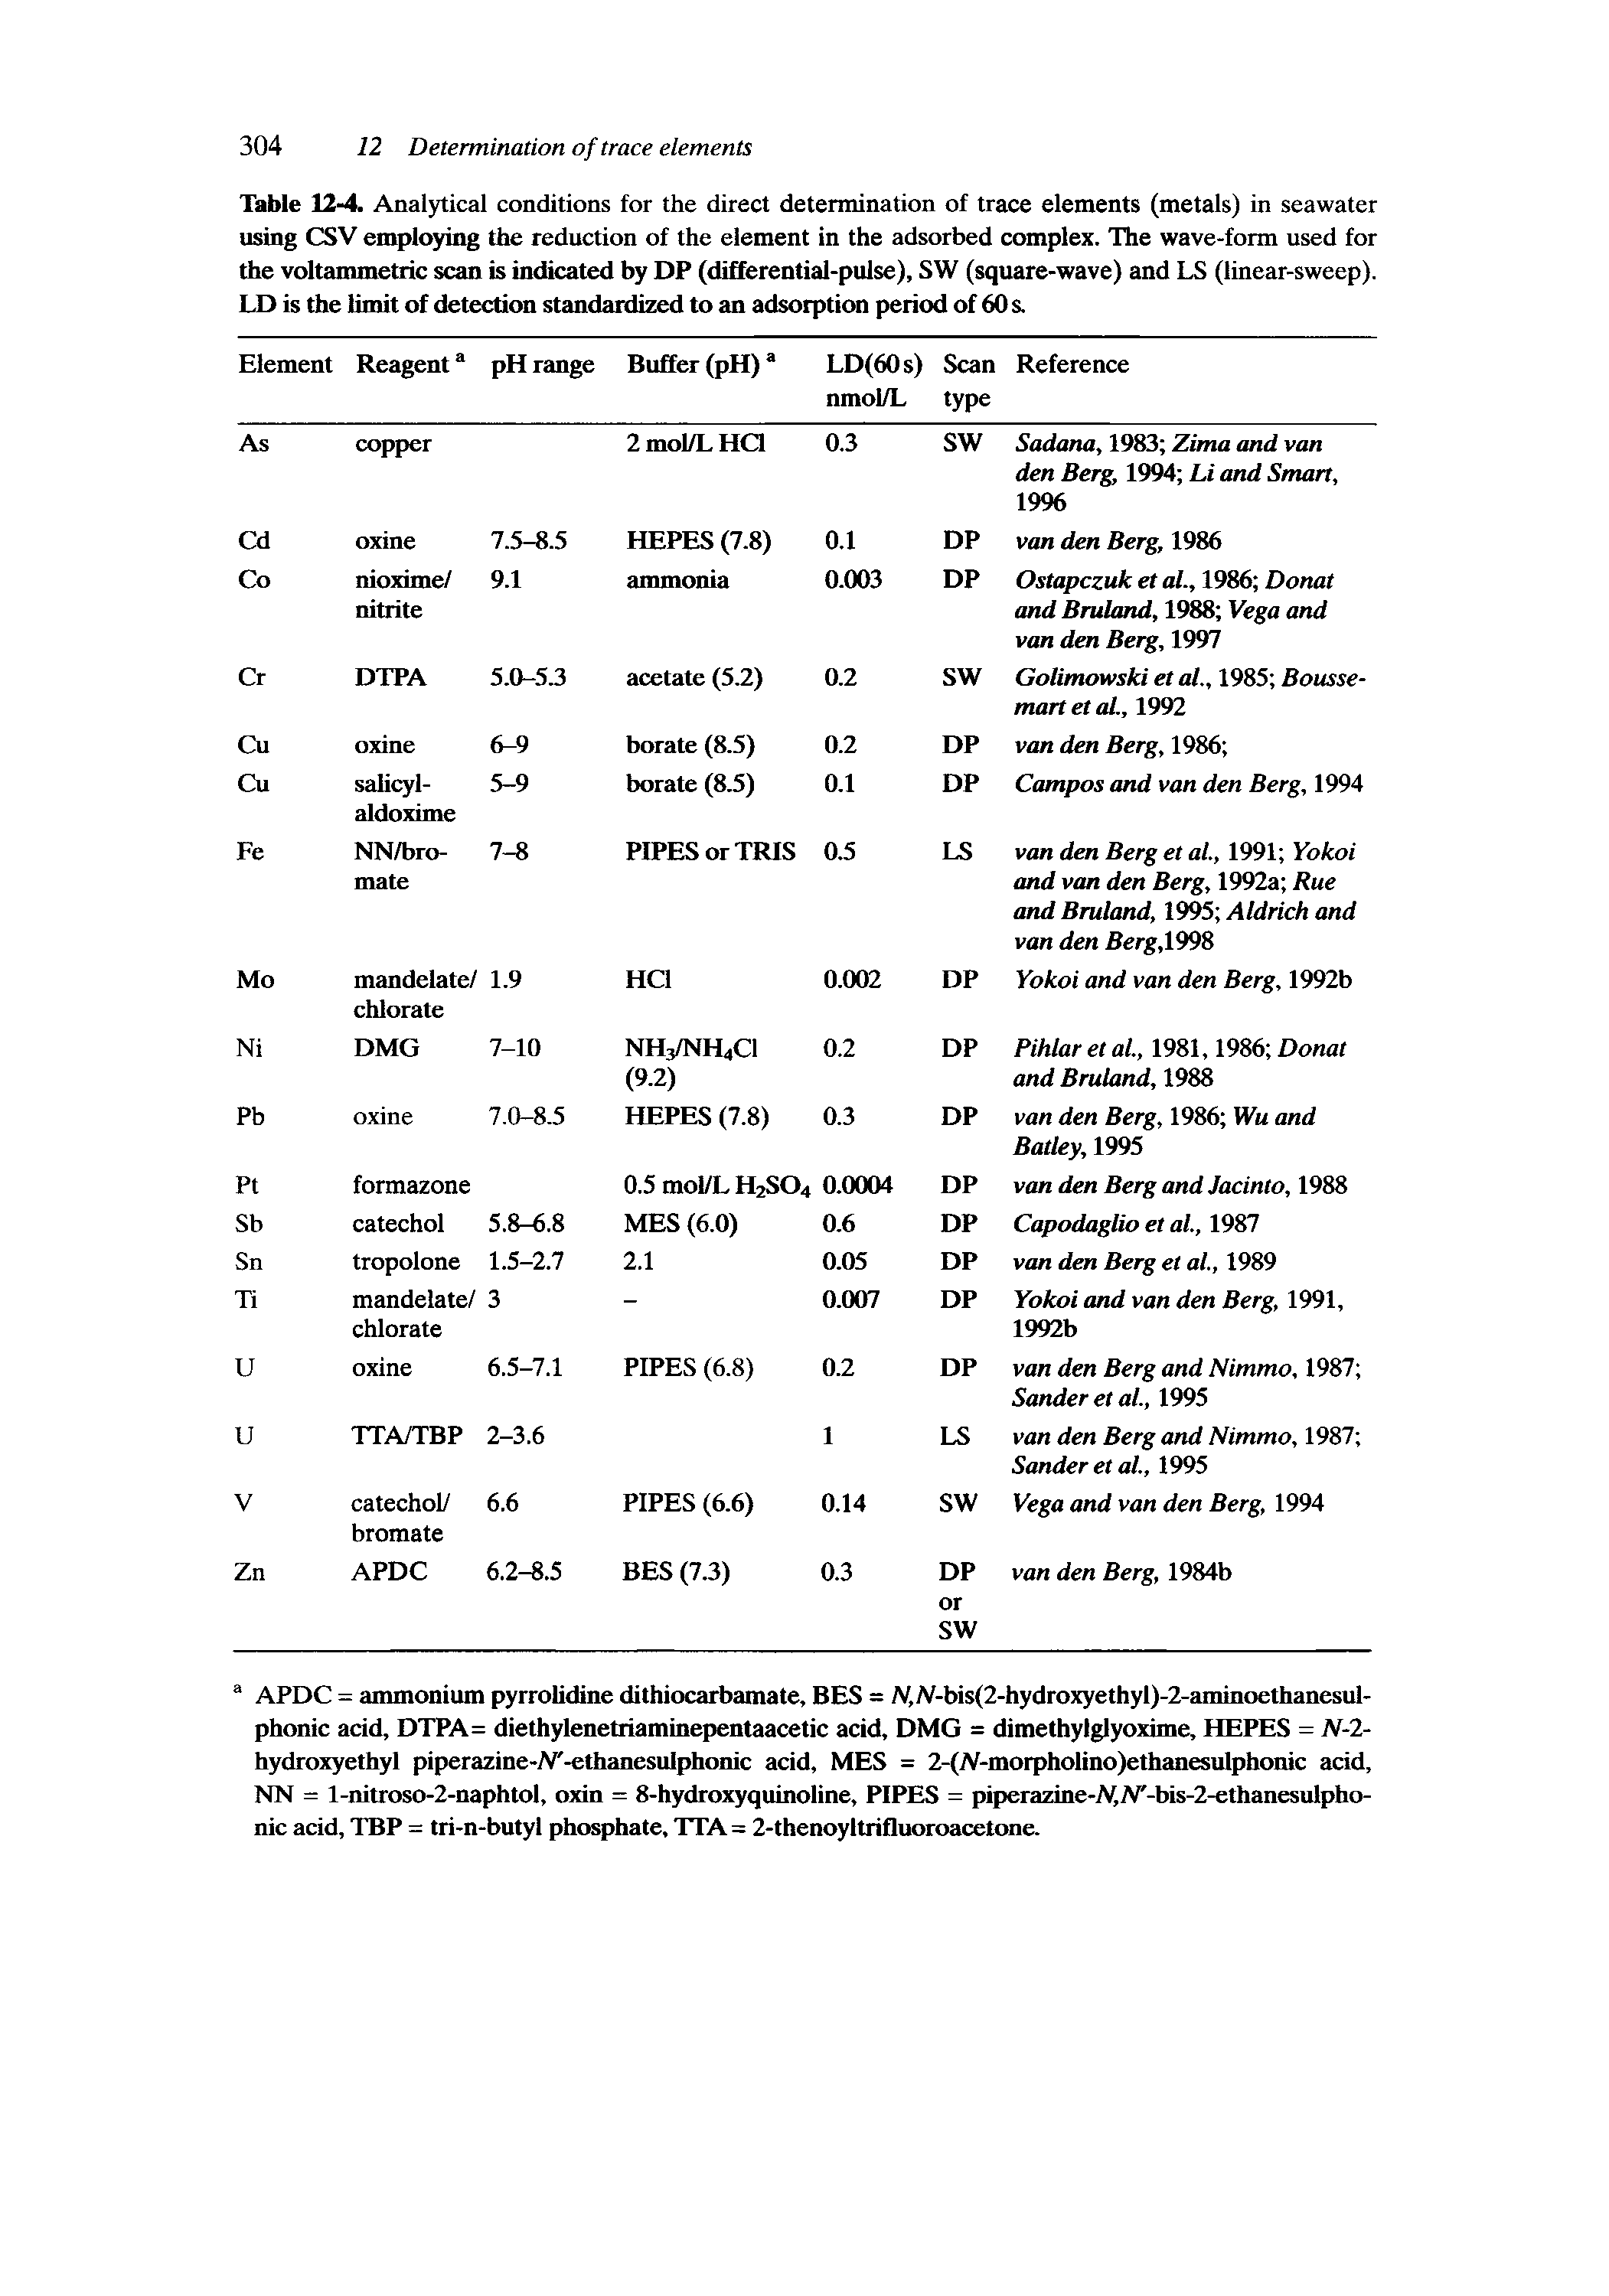 Table 12-4. Analytical conditions for the direct determination of trace elements (metals) in seawater using CSV employing the reduction of the element in the adsorbed complex. Hie wave-form used for the voltammetric scan is indicated by DP (differential-pulse), SW (square-wave) and LS (linear-sweep). LD is the limit of detection standardized to an adsorption period of 60s.